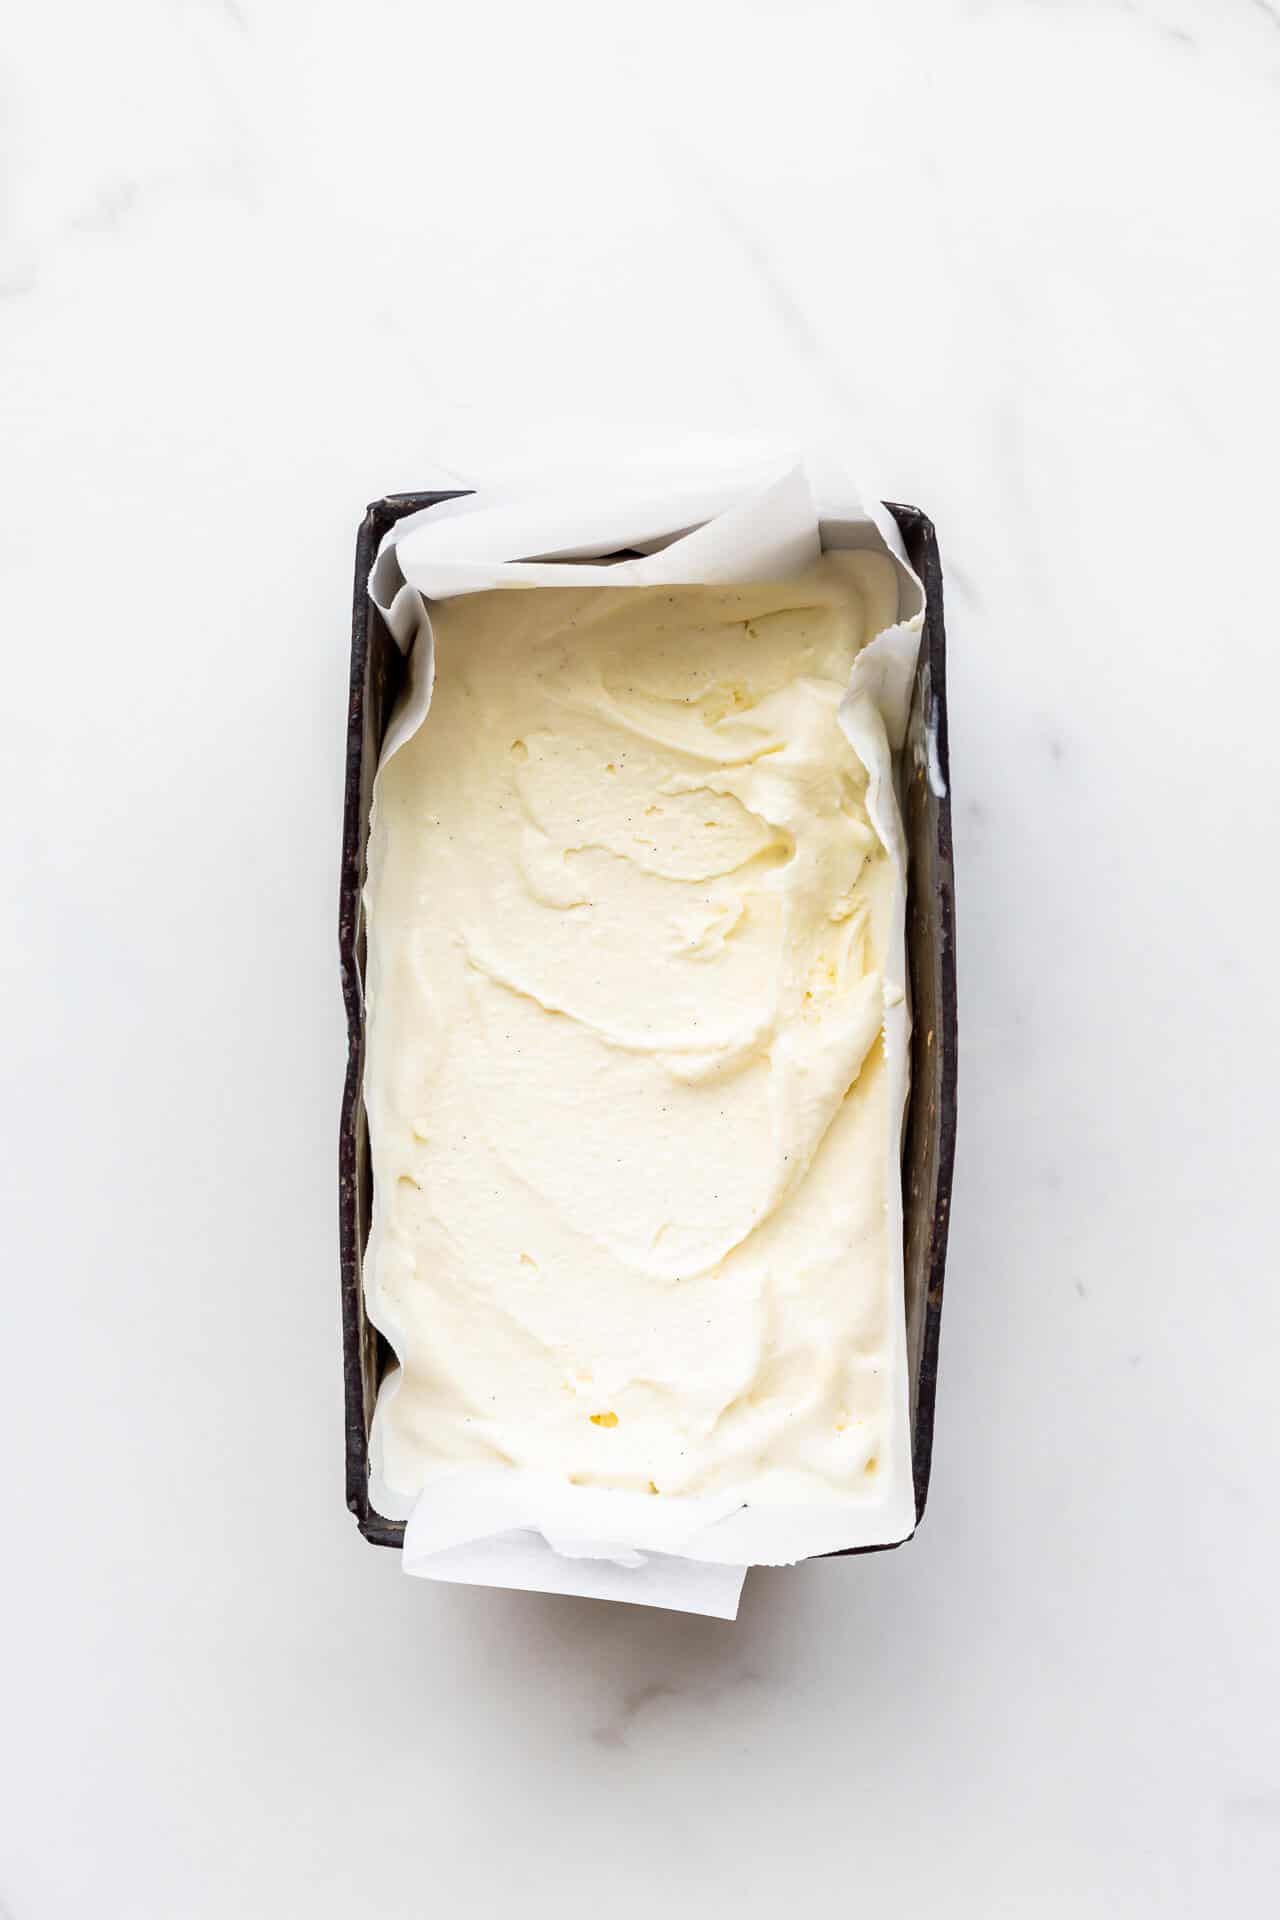 Freshly churned cardamom ice cream transfered to a big dark loaf pan to chill until frozen solid